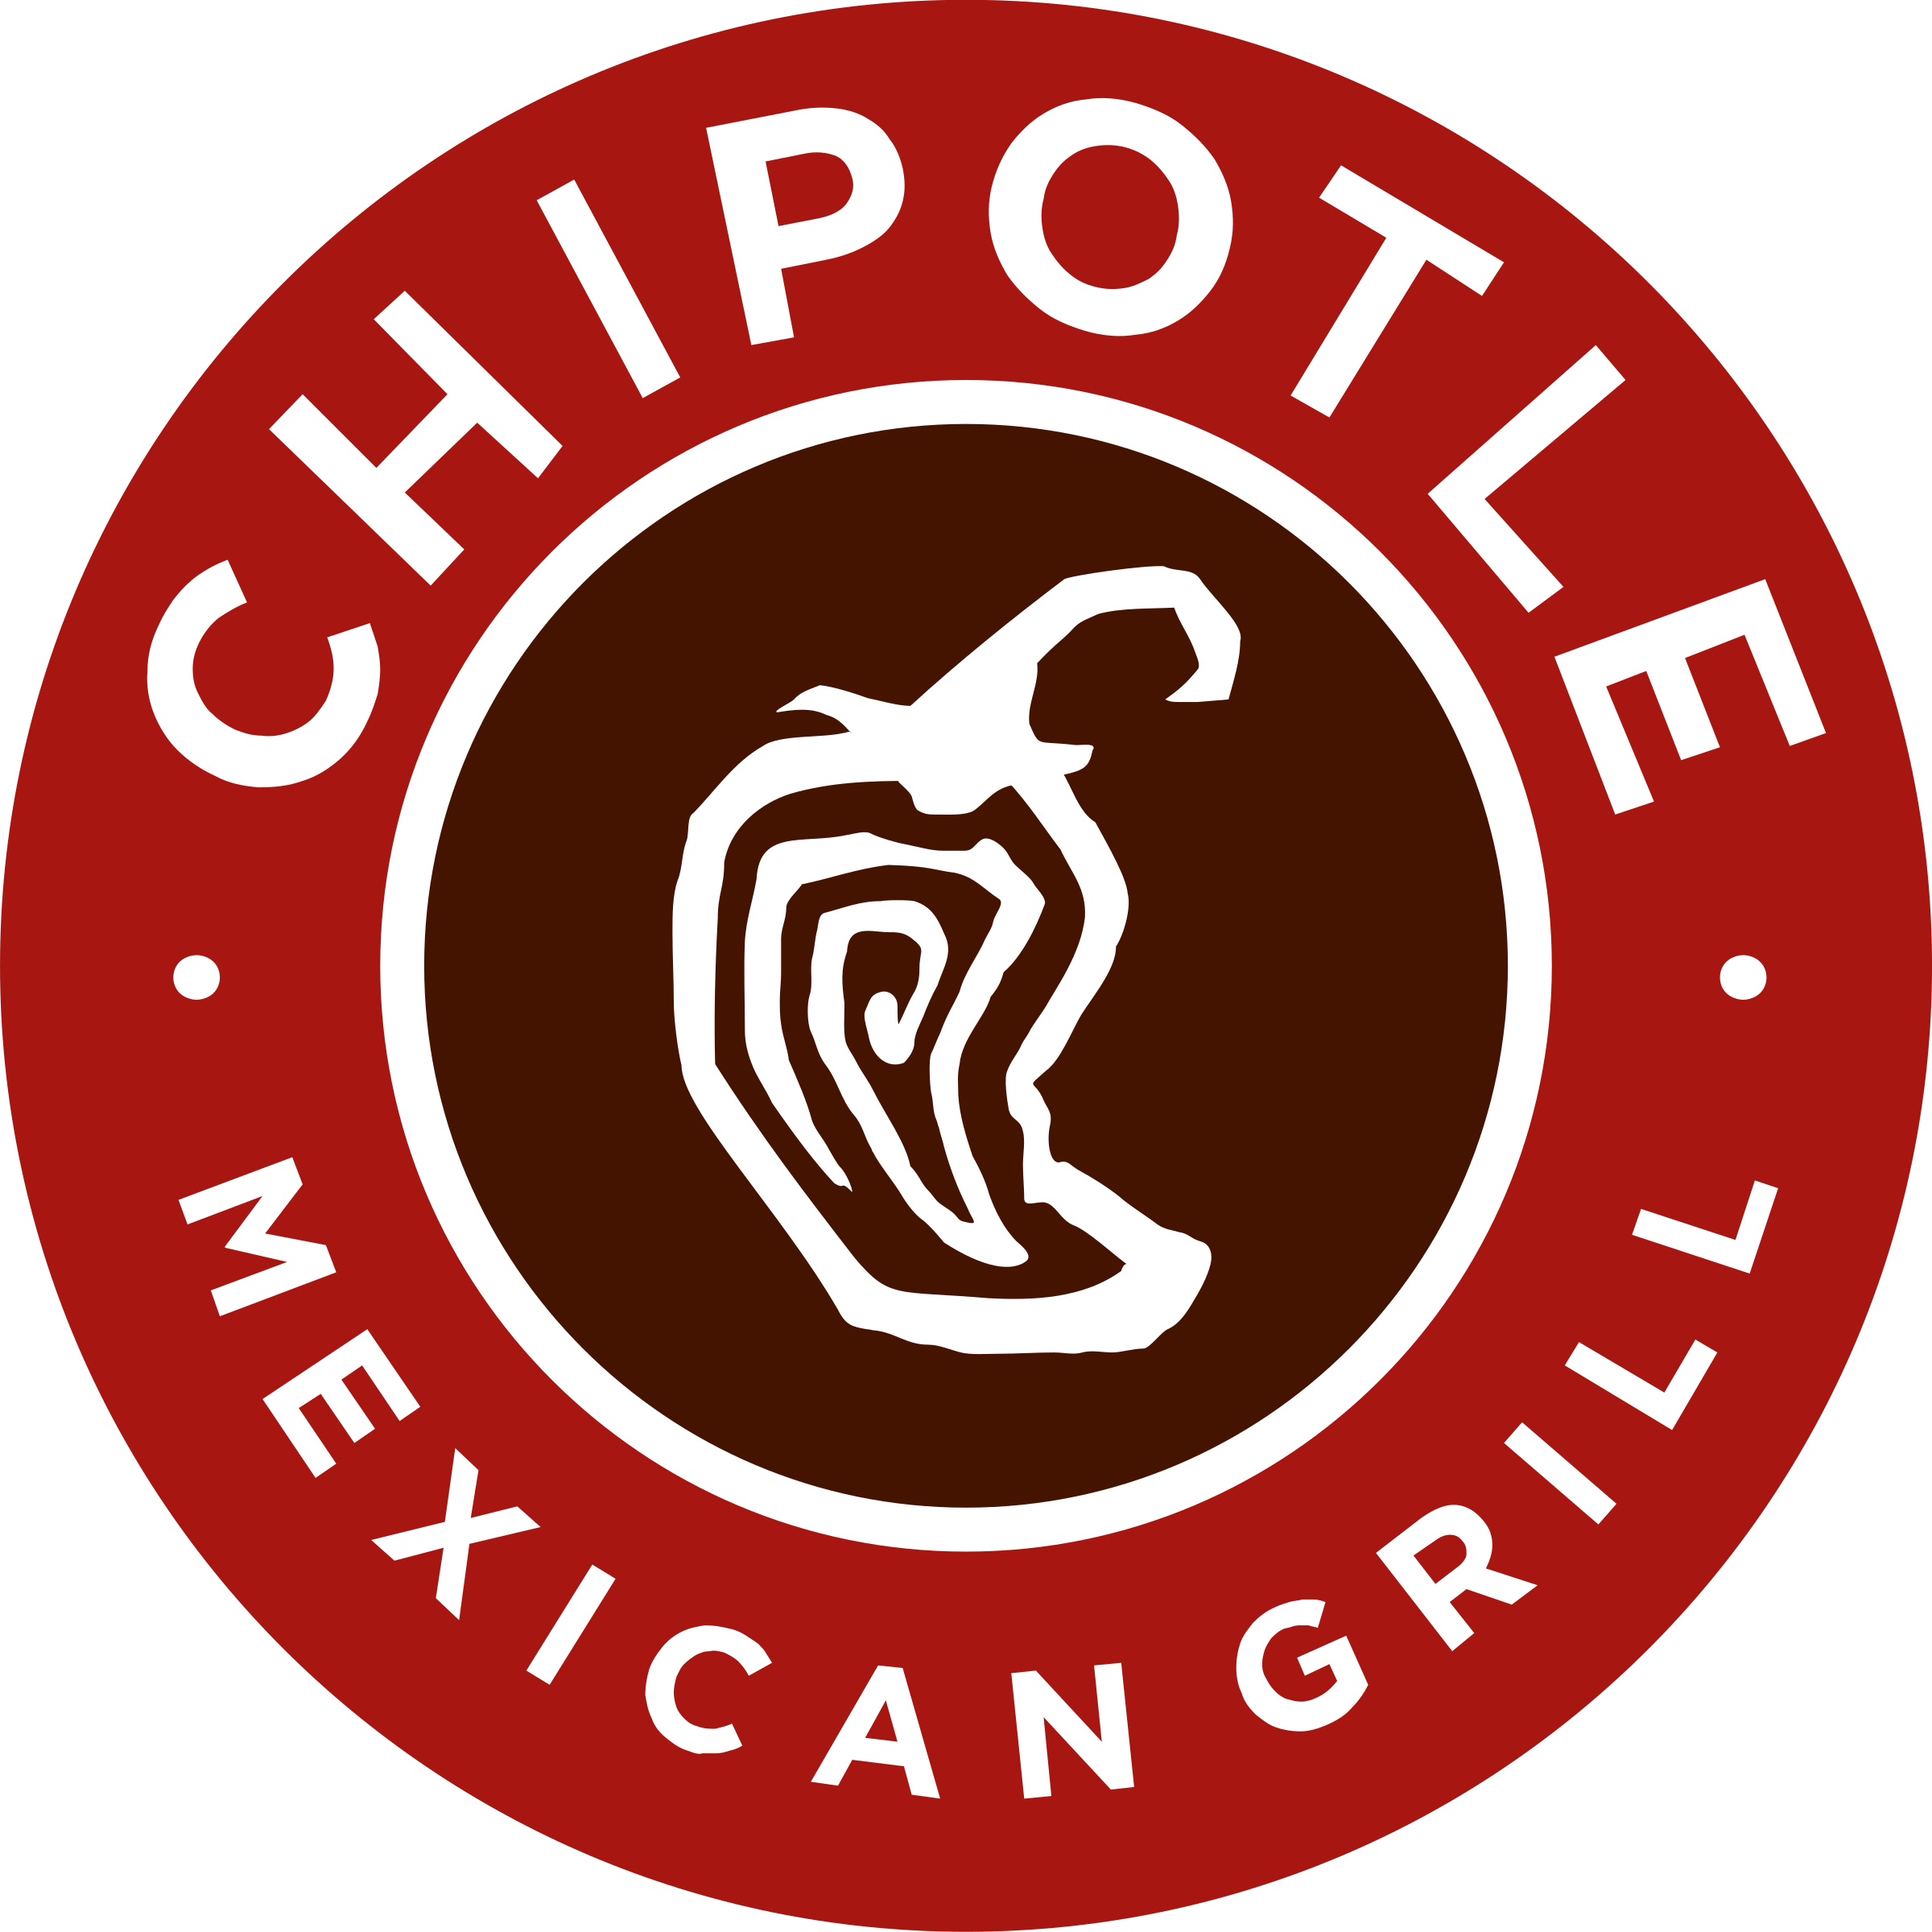 chipotle mexican grill logo png transparent